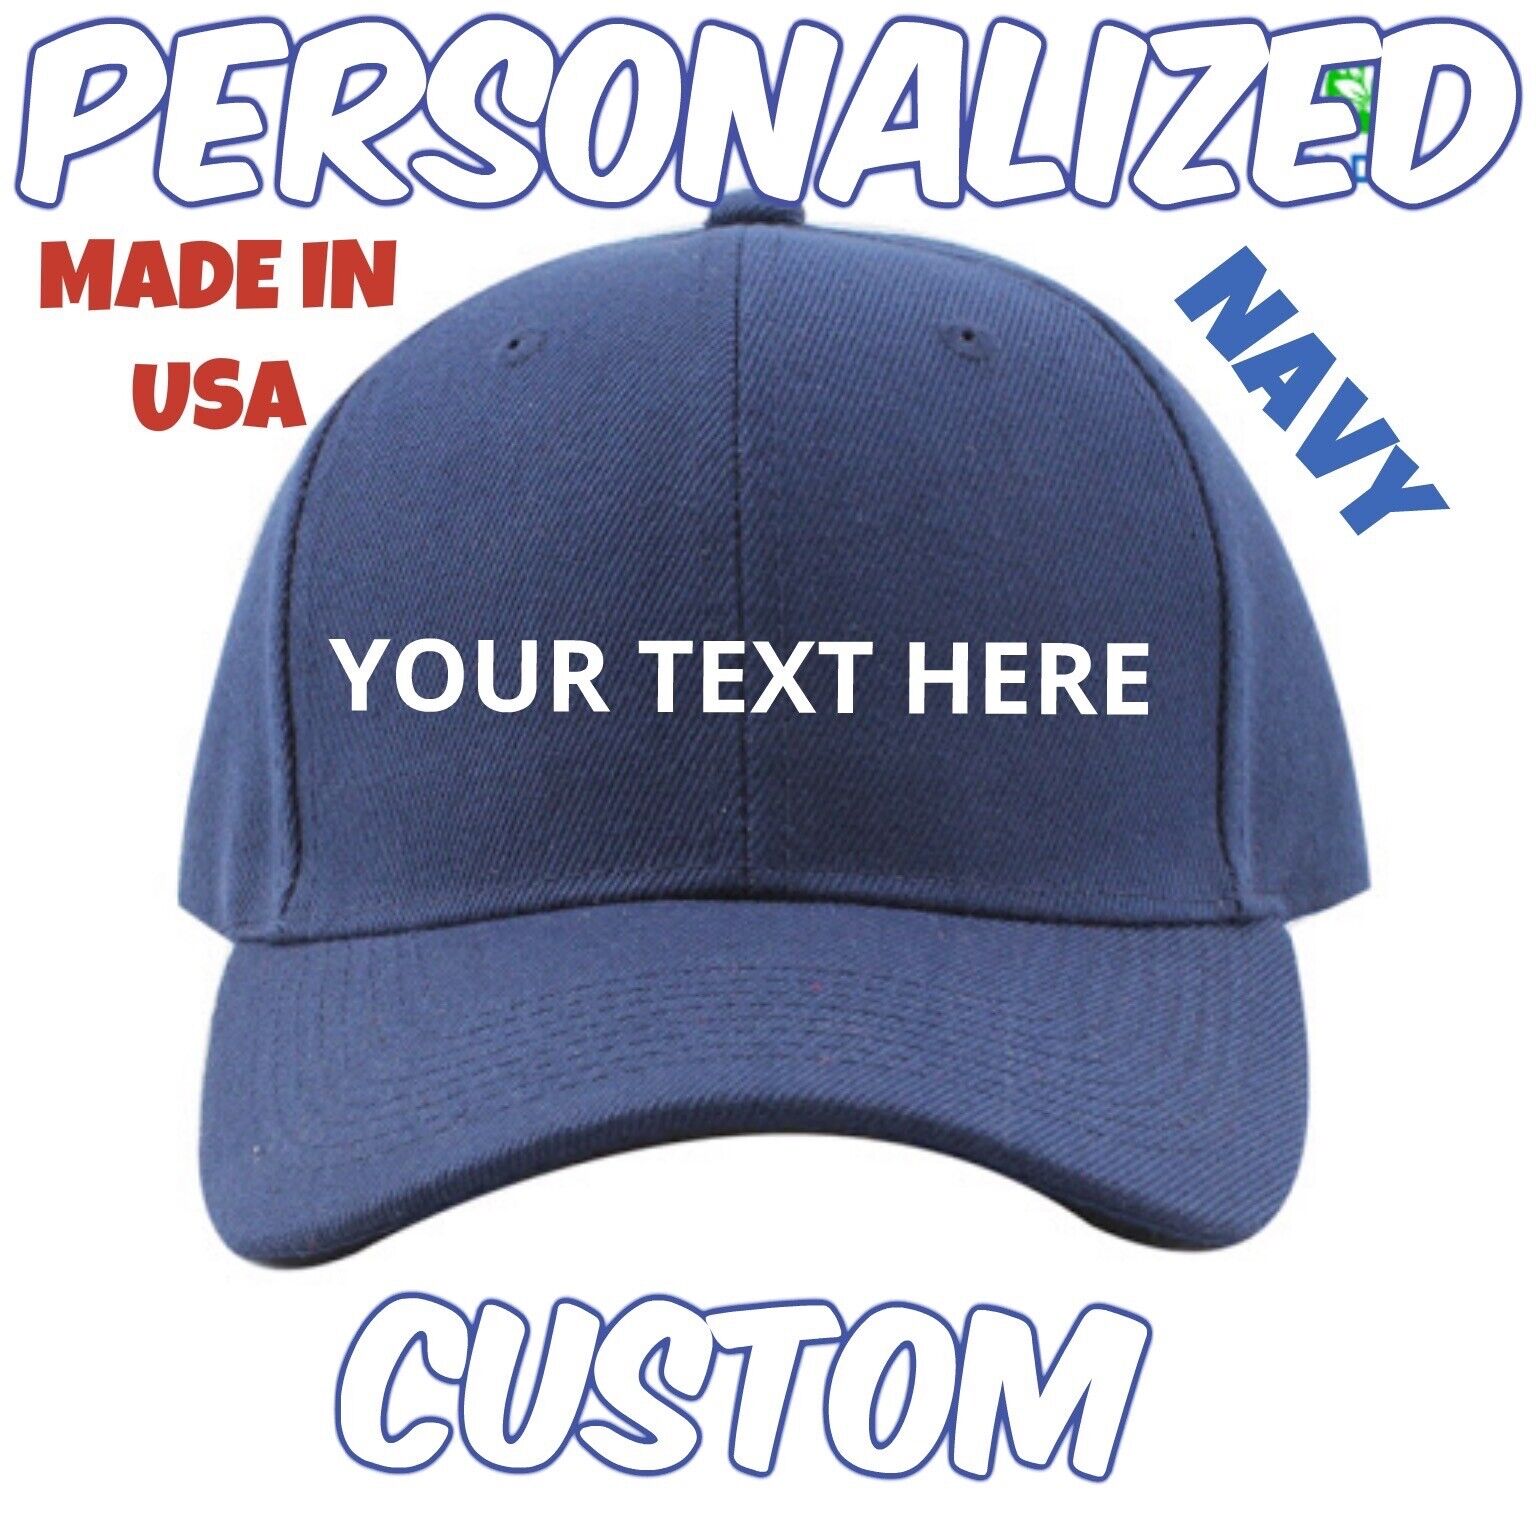 CUSTOM PERSONALIZED Multi Color EMBROIDERED Hats Design Your Own HAT PERSONALIZE